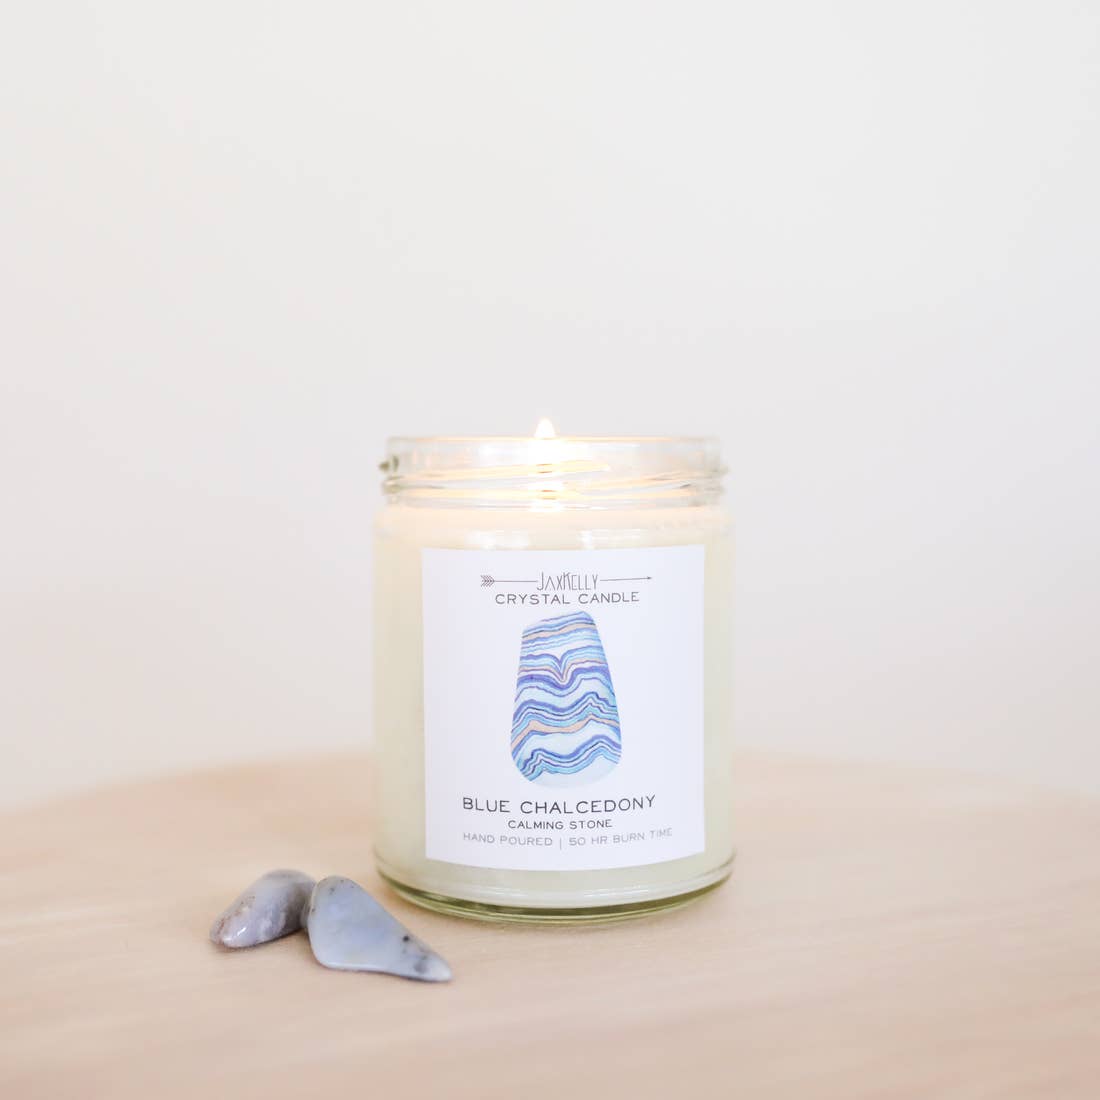 Blue Chalcedony Crystal Candle - Calming | 9oz